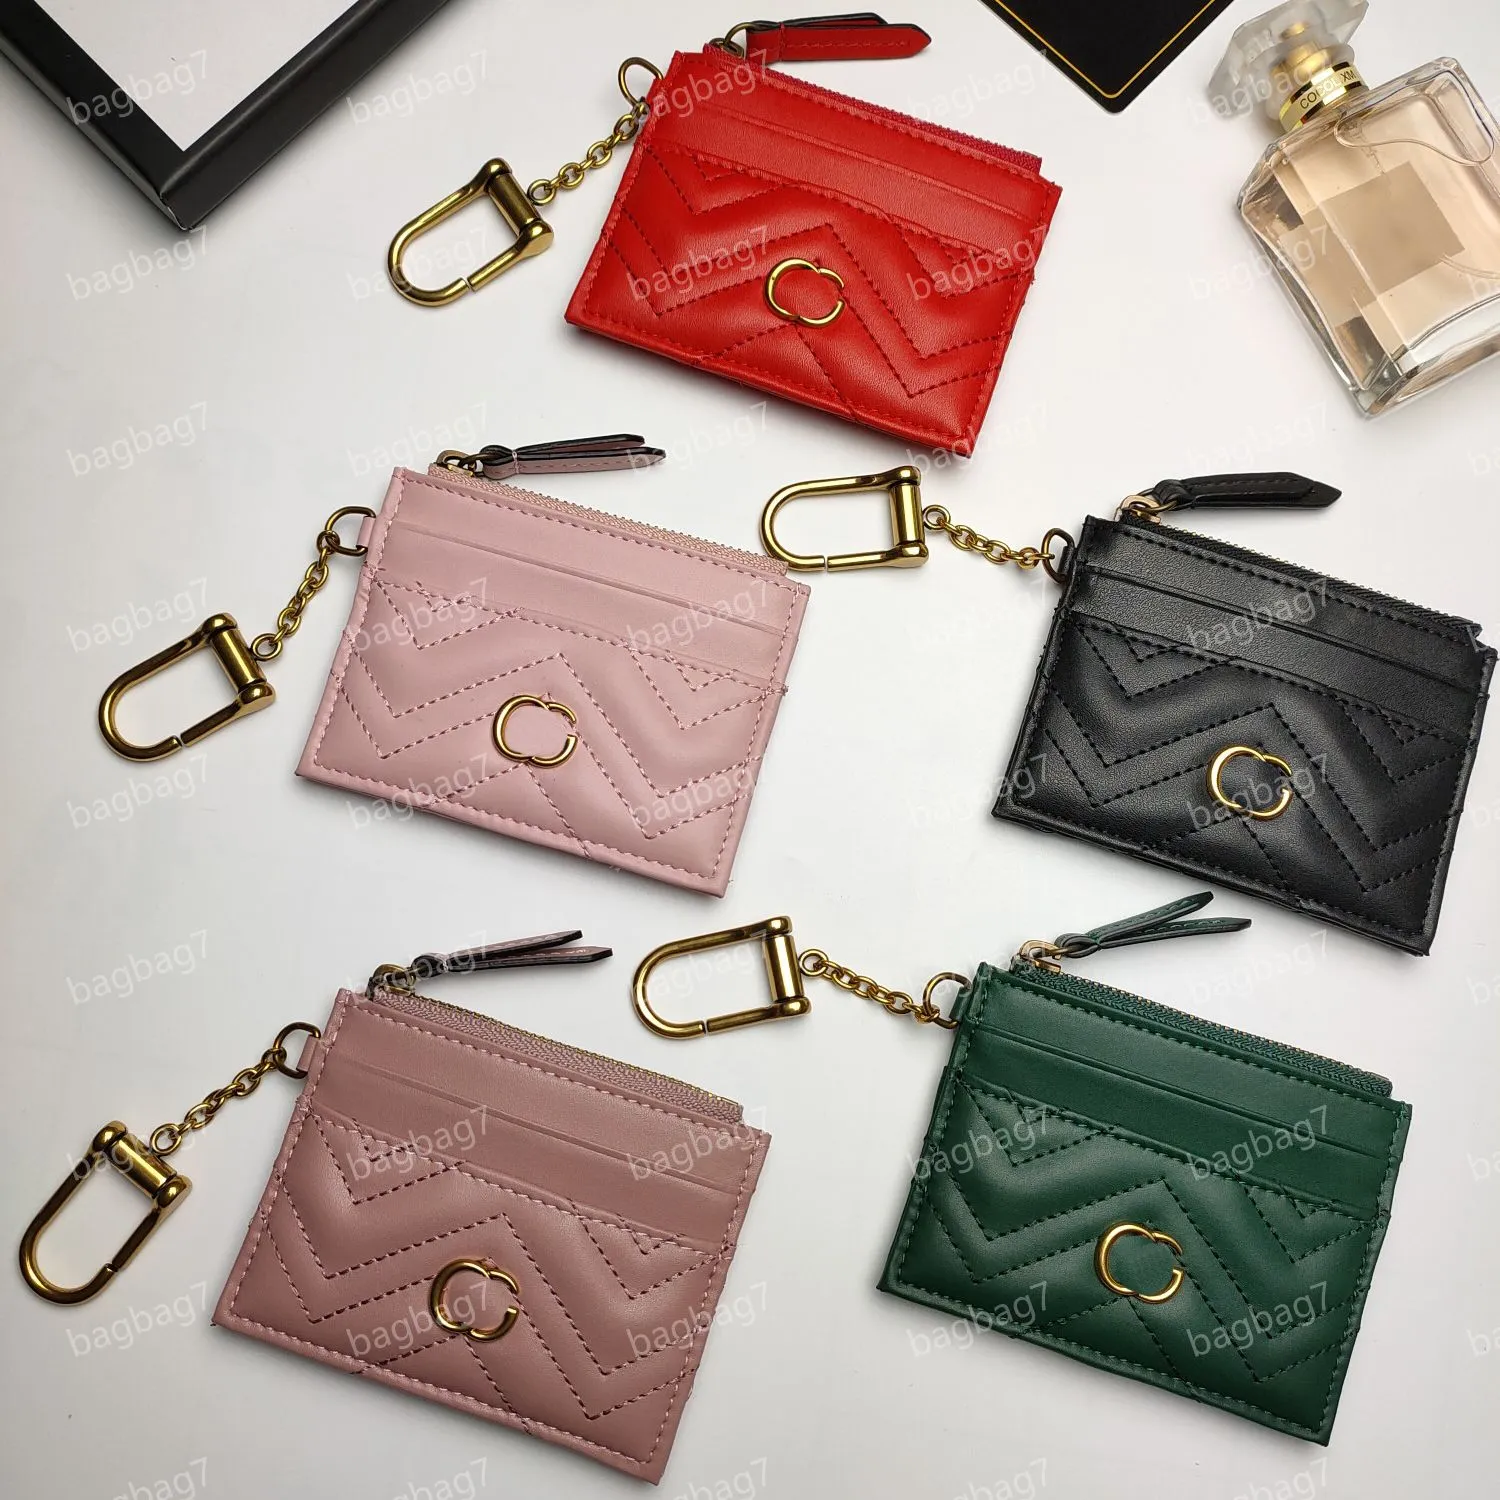 10A Quality Marmont Keychain wallet zipper Wallet Luxurys Designer card holder Mini coin purses pocket Leather pocket organizer Coin Purses Womens Pouch key Wallet